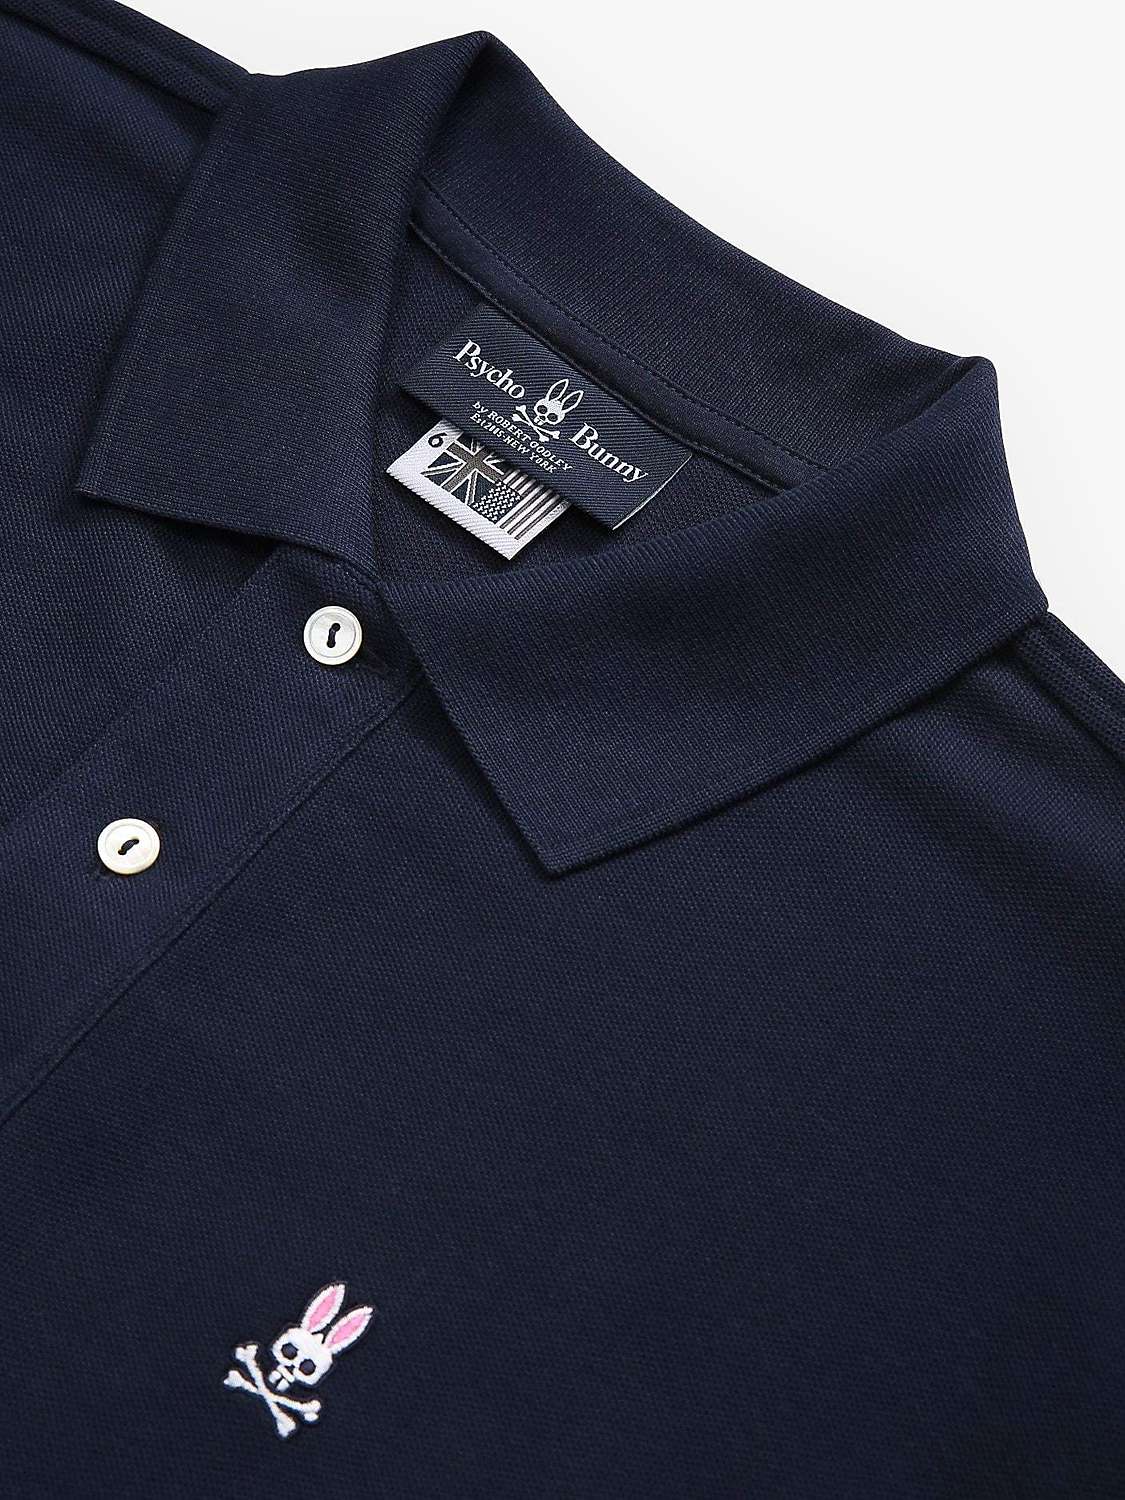 Buy Psycho Bunny Classic Long Sleeve Pique Polo Shirt Online at johnlewis.com